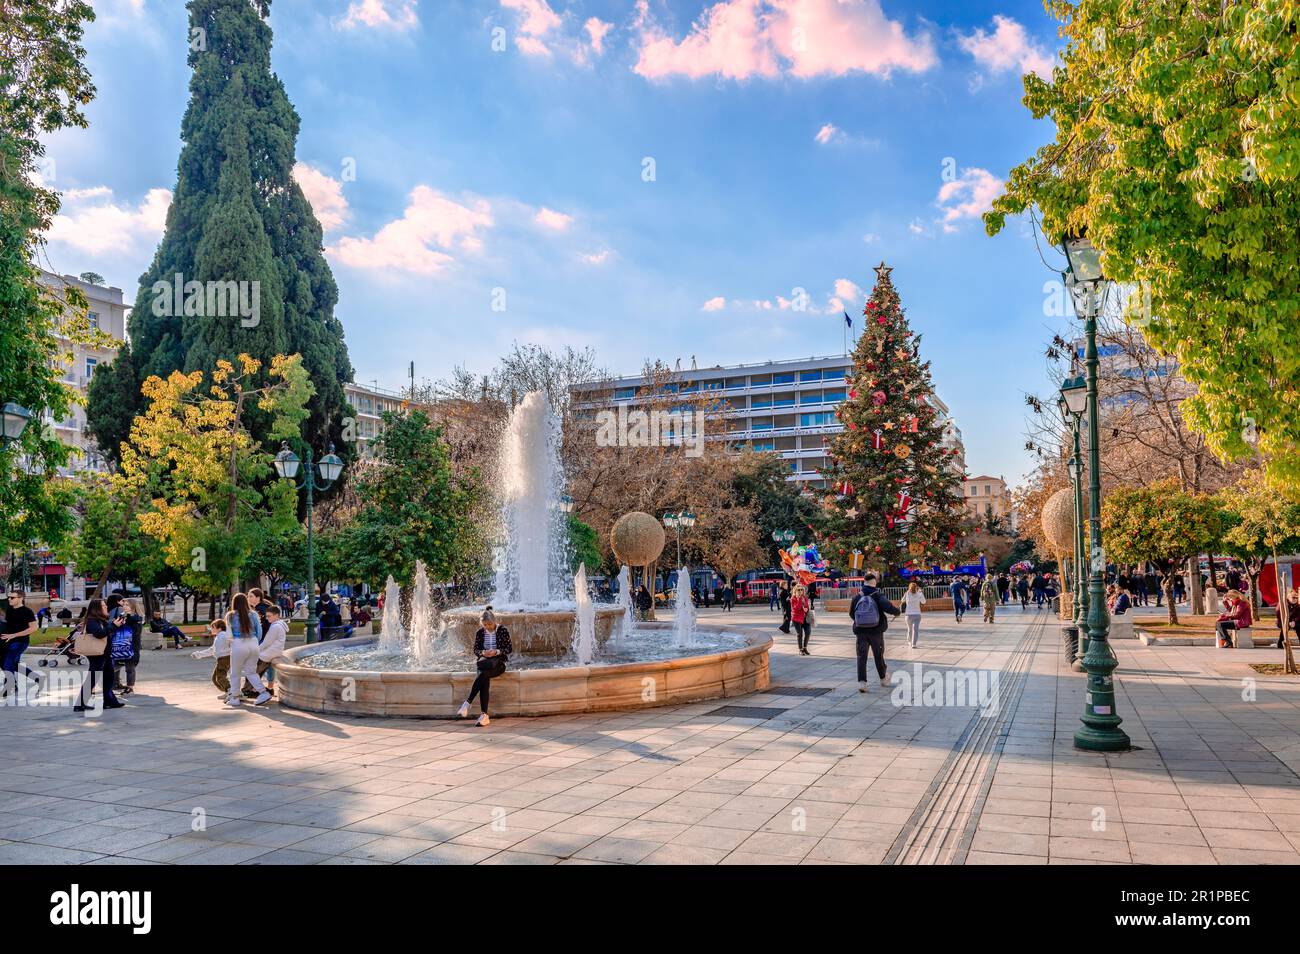 Plateia Syntagmatus (Syntagma Square), what is generally considered to be the centre of Athens, Greece, on a sunny day in the winter. Stock Photo